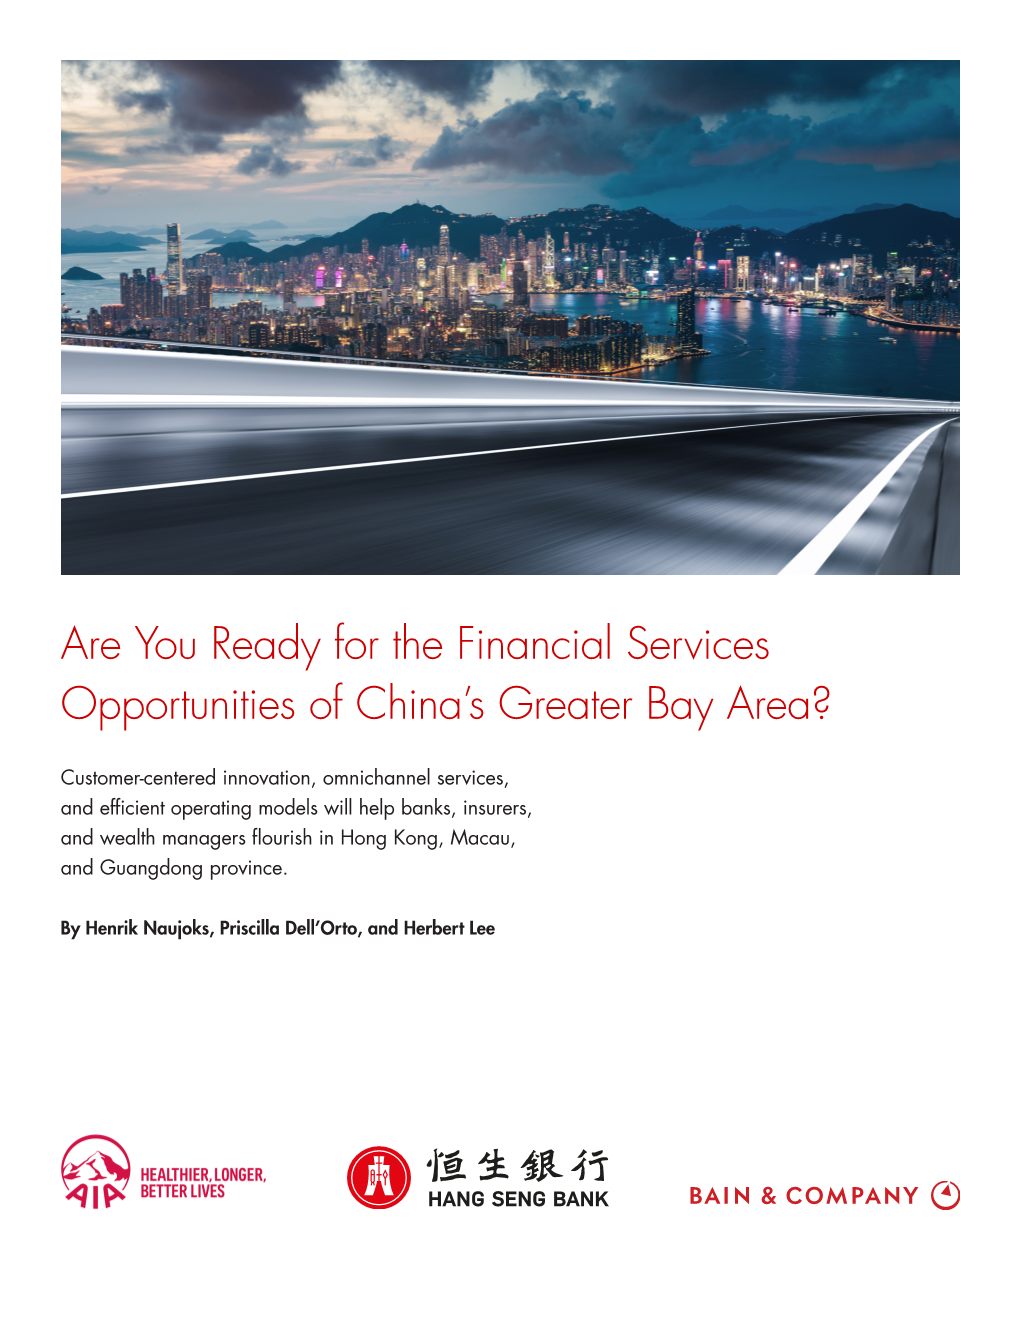 Are You Ready for the Financial Services Opportunities of China's